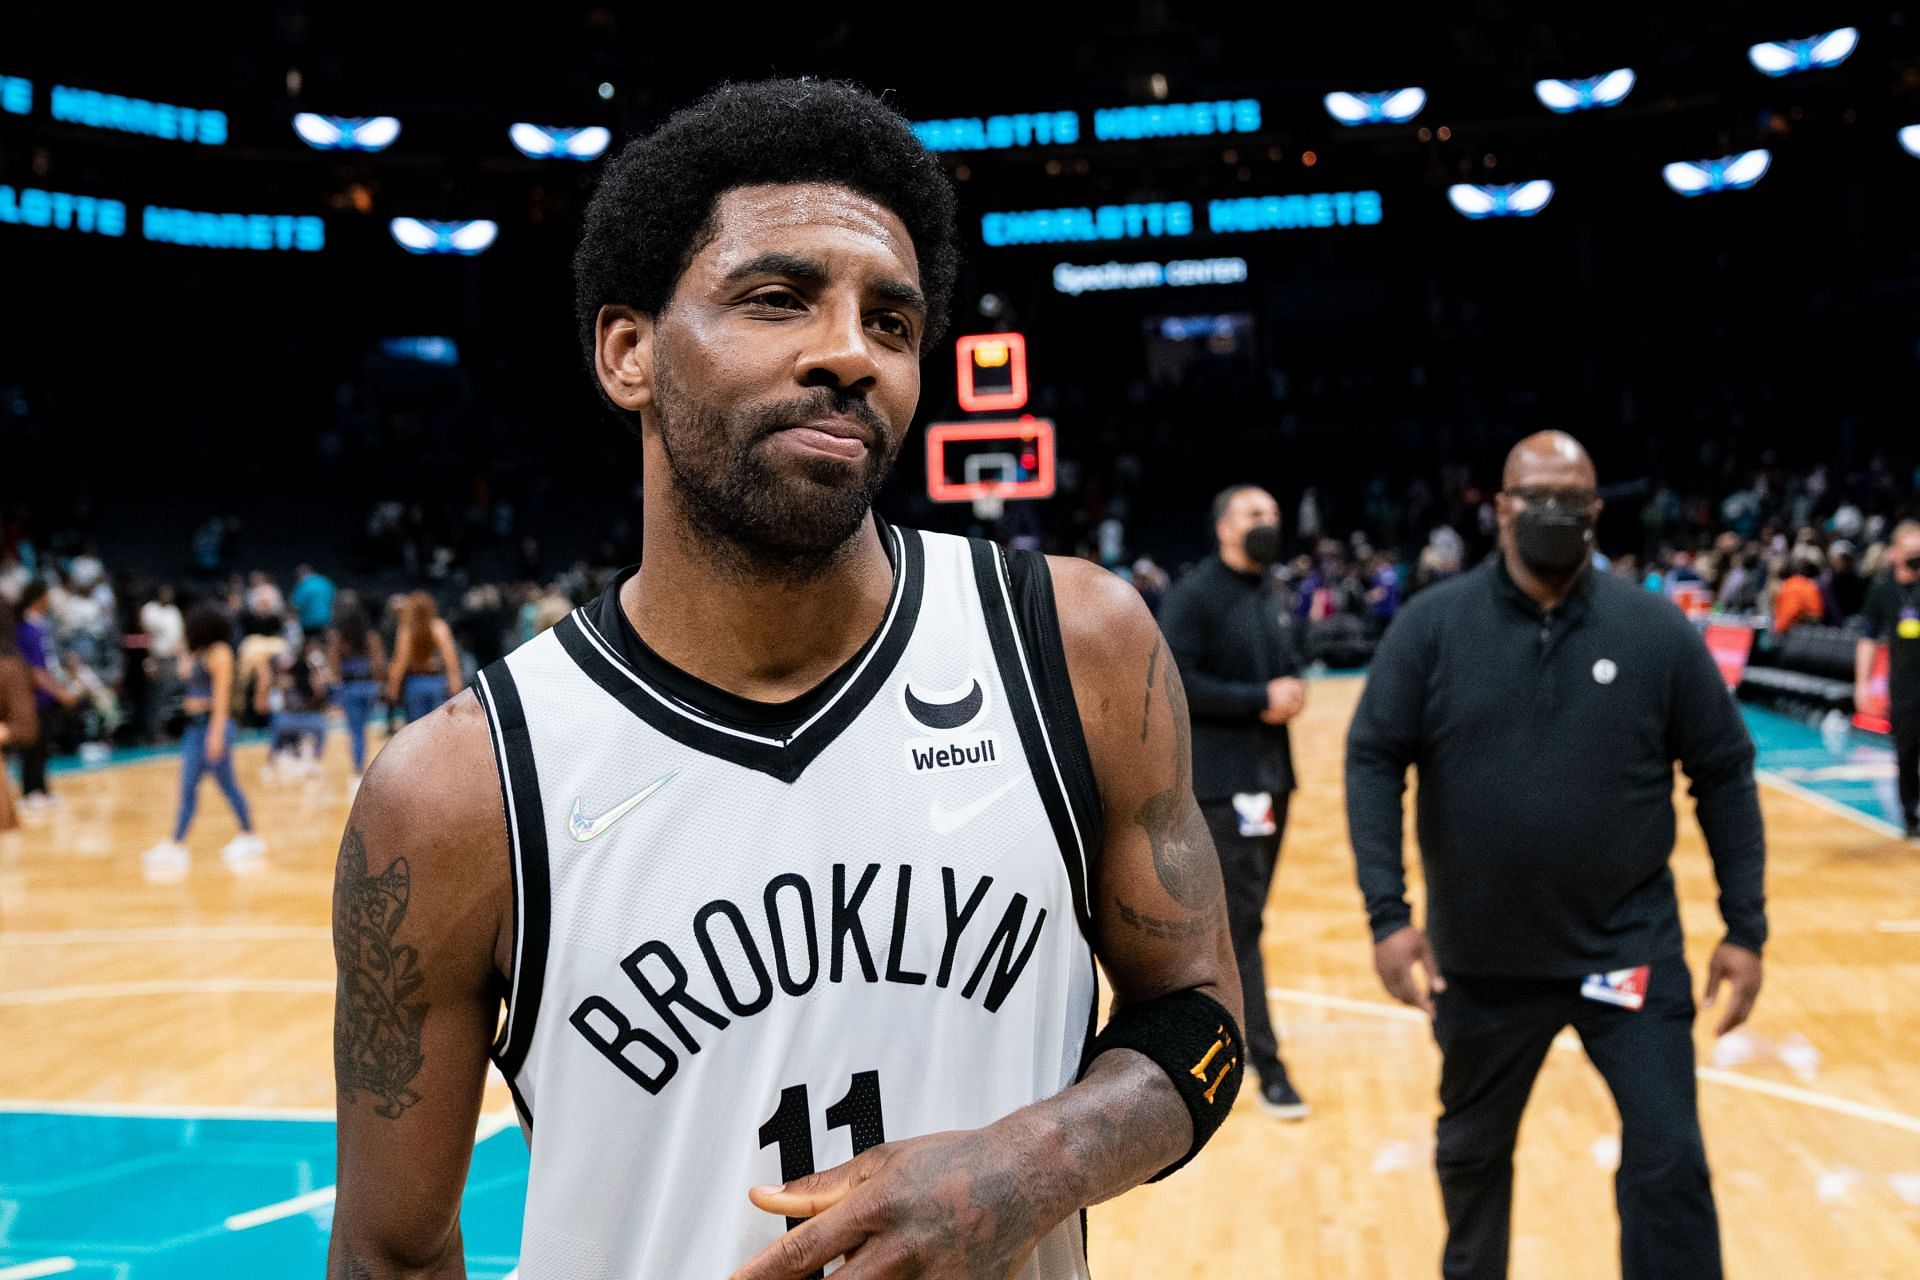 Brooklyn Nets superstar Kyrie Irving is unavailable for this game